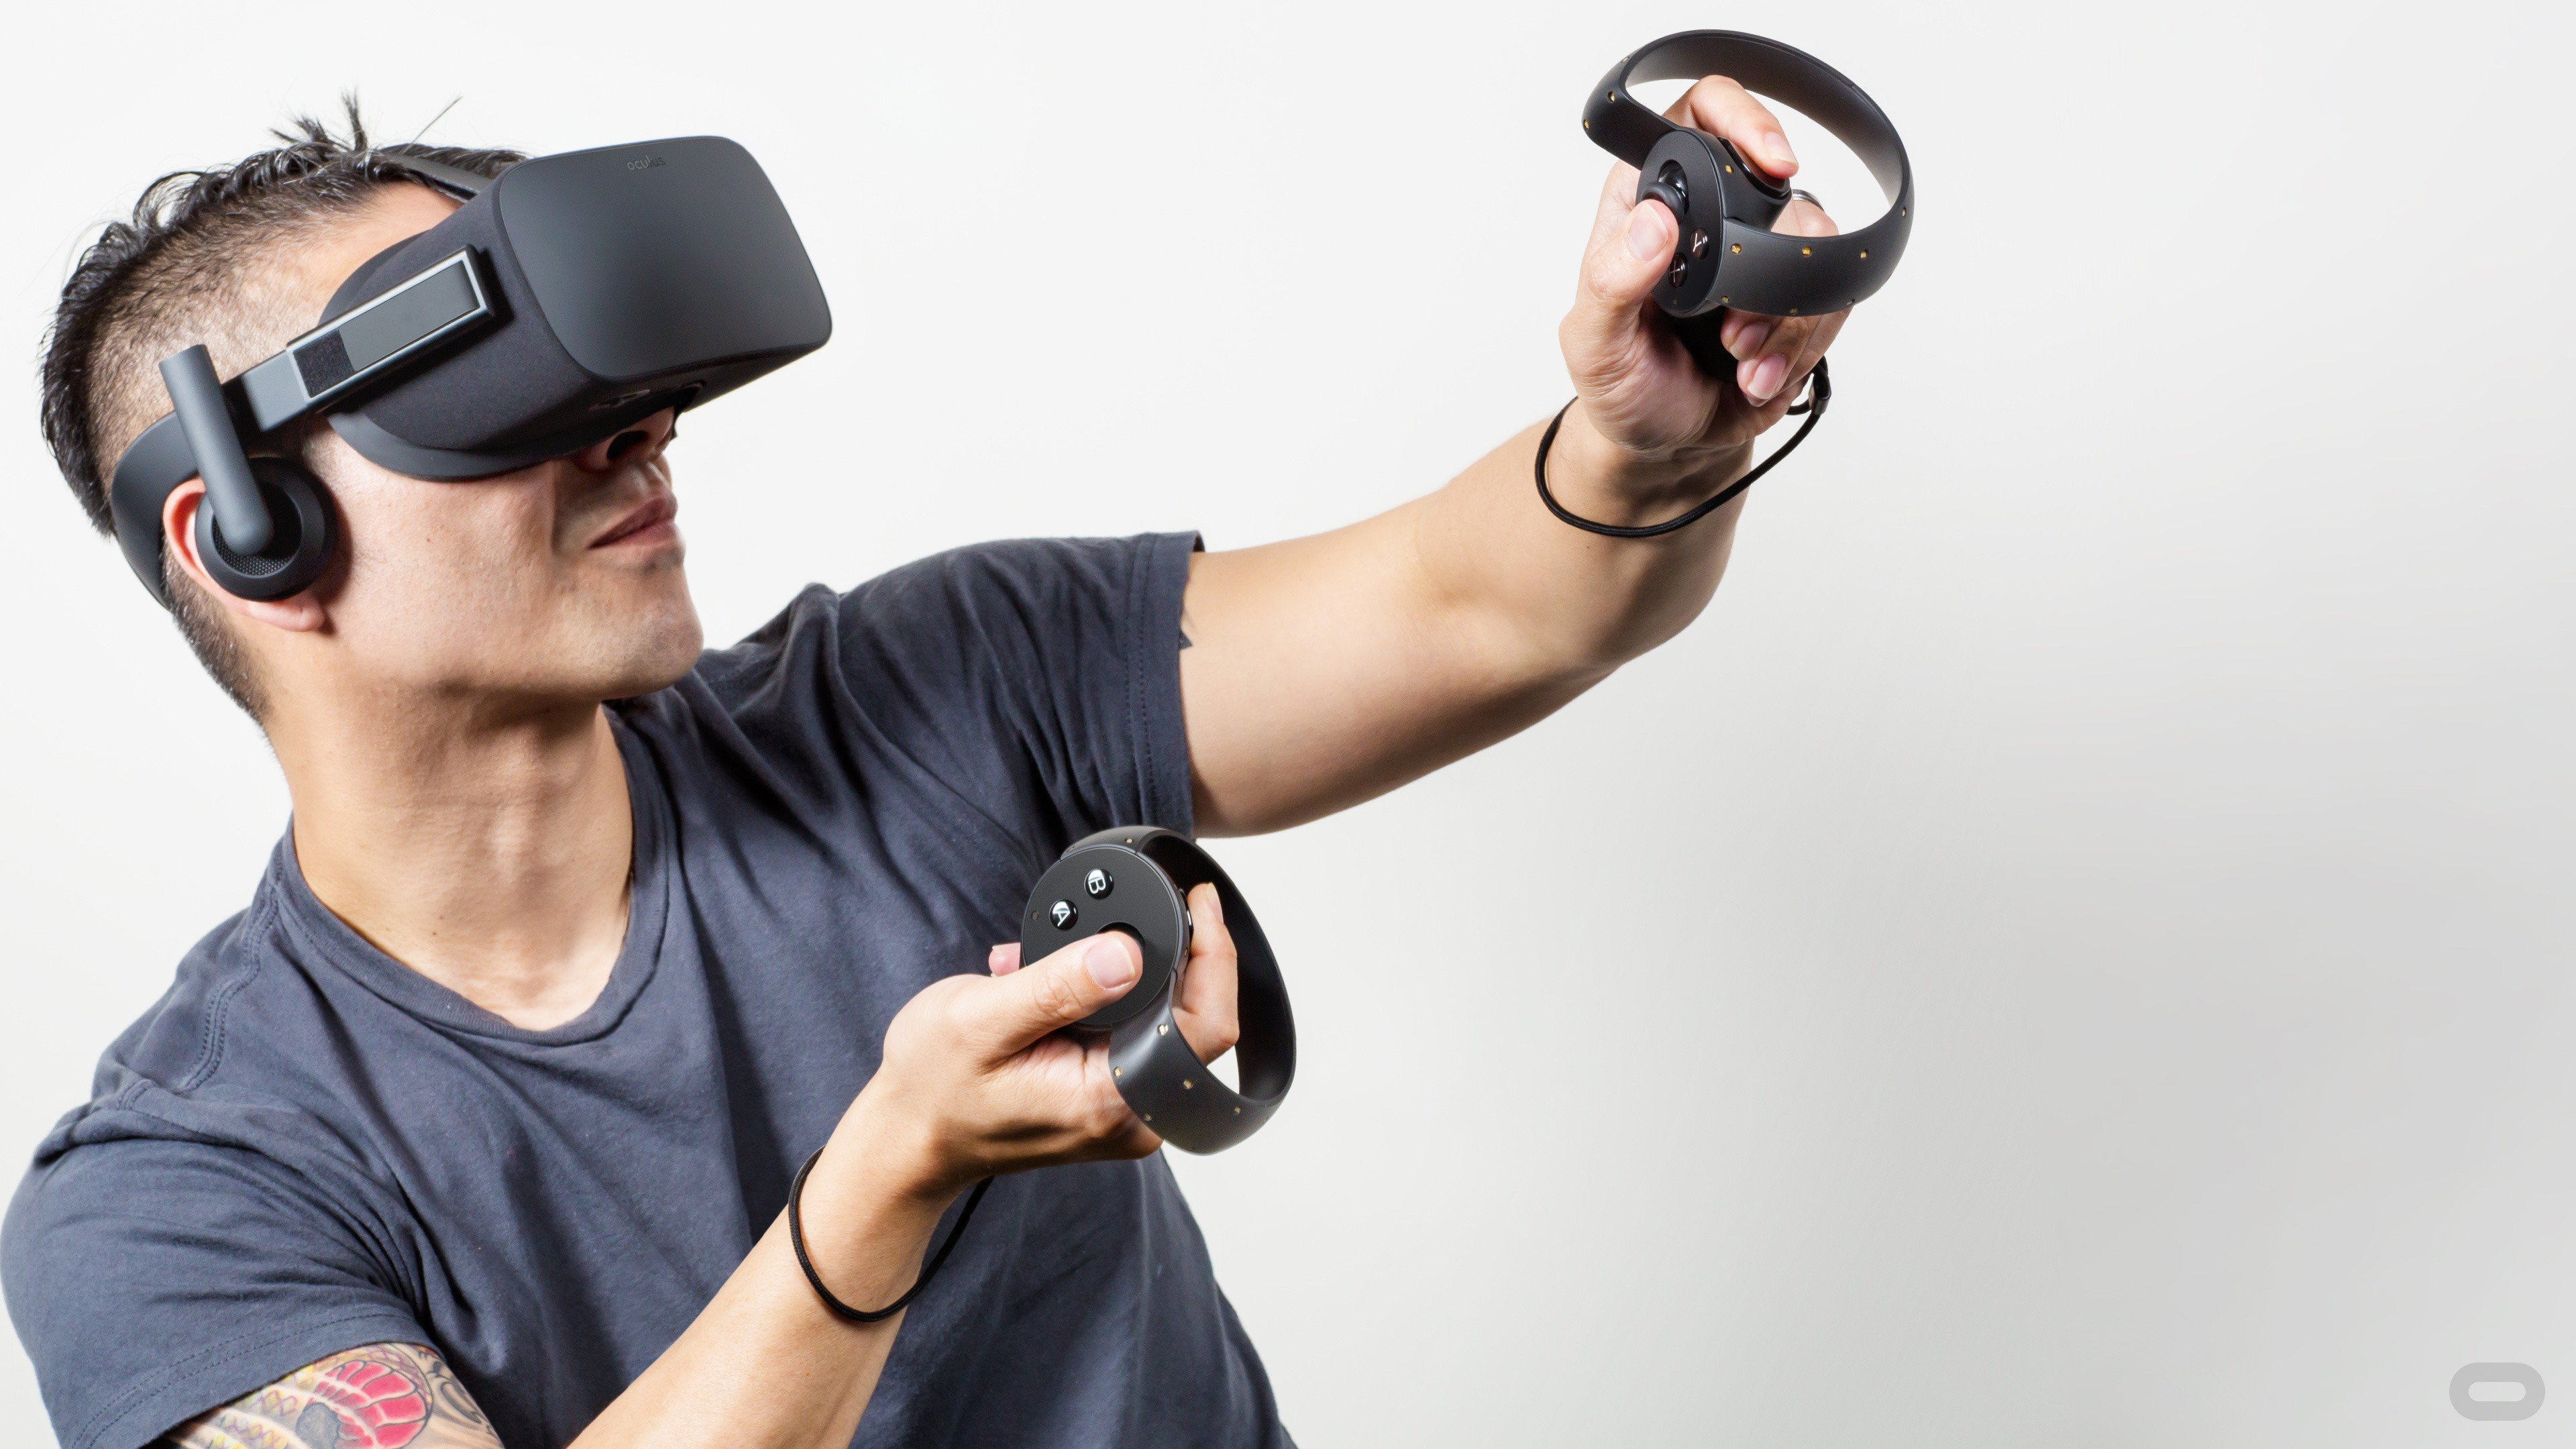 Oculus Vr Slashes The Price Of Oculus Rift Down To 399 Techpowerup